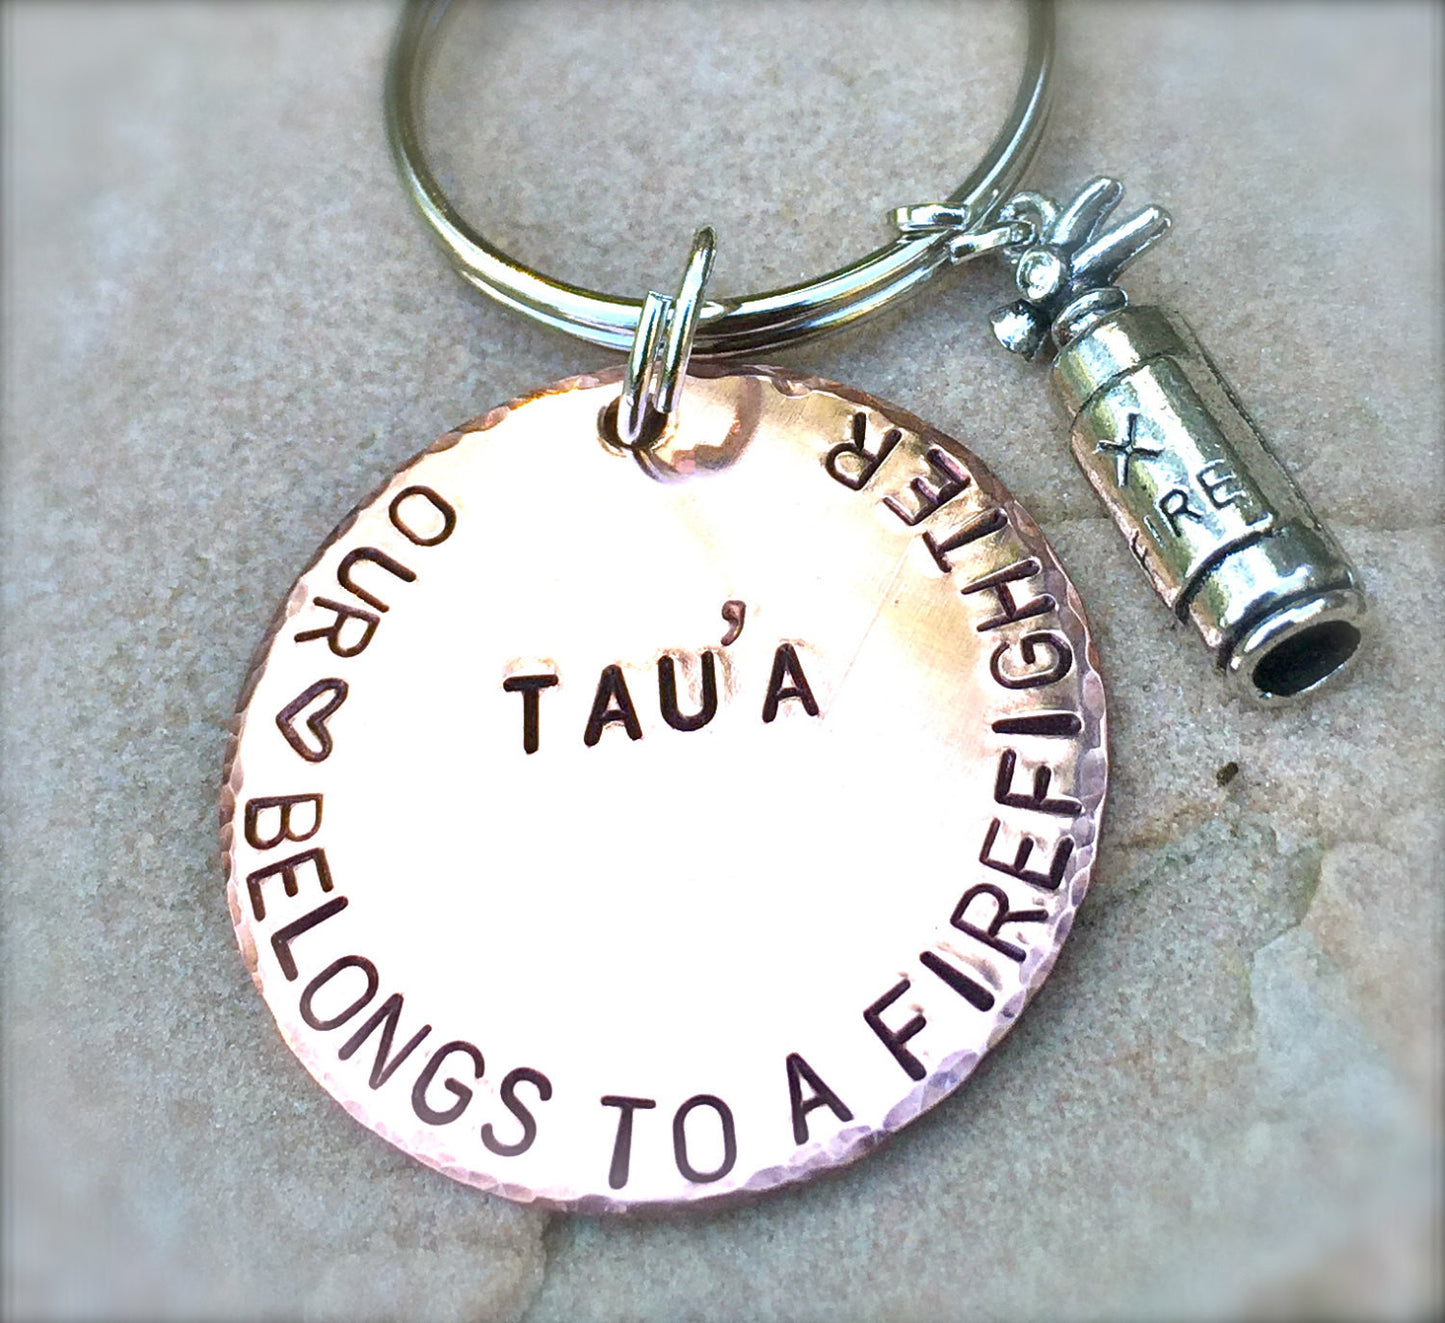 Firefighter Keychain, Our Heart Belongs To A Firefighter, Personalized Firefighter Gift, Firefighter Gift, natashaaloha - Natashaaloha, jewelry, bracelets, necklace, keychains, fishing lures, gifts for men, charms, personalized, 